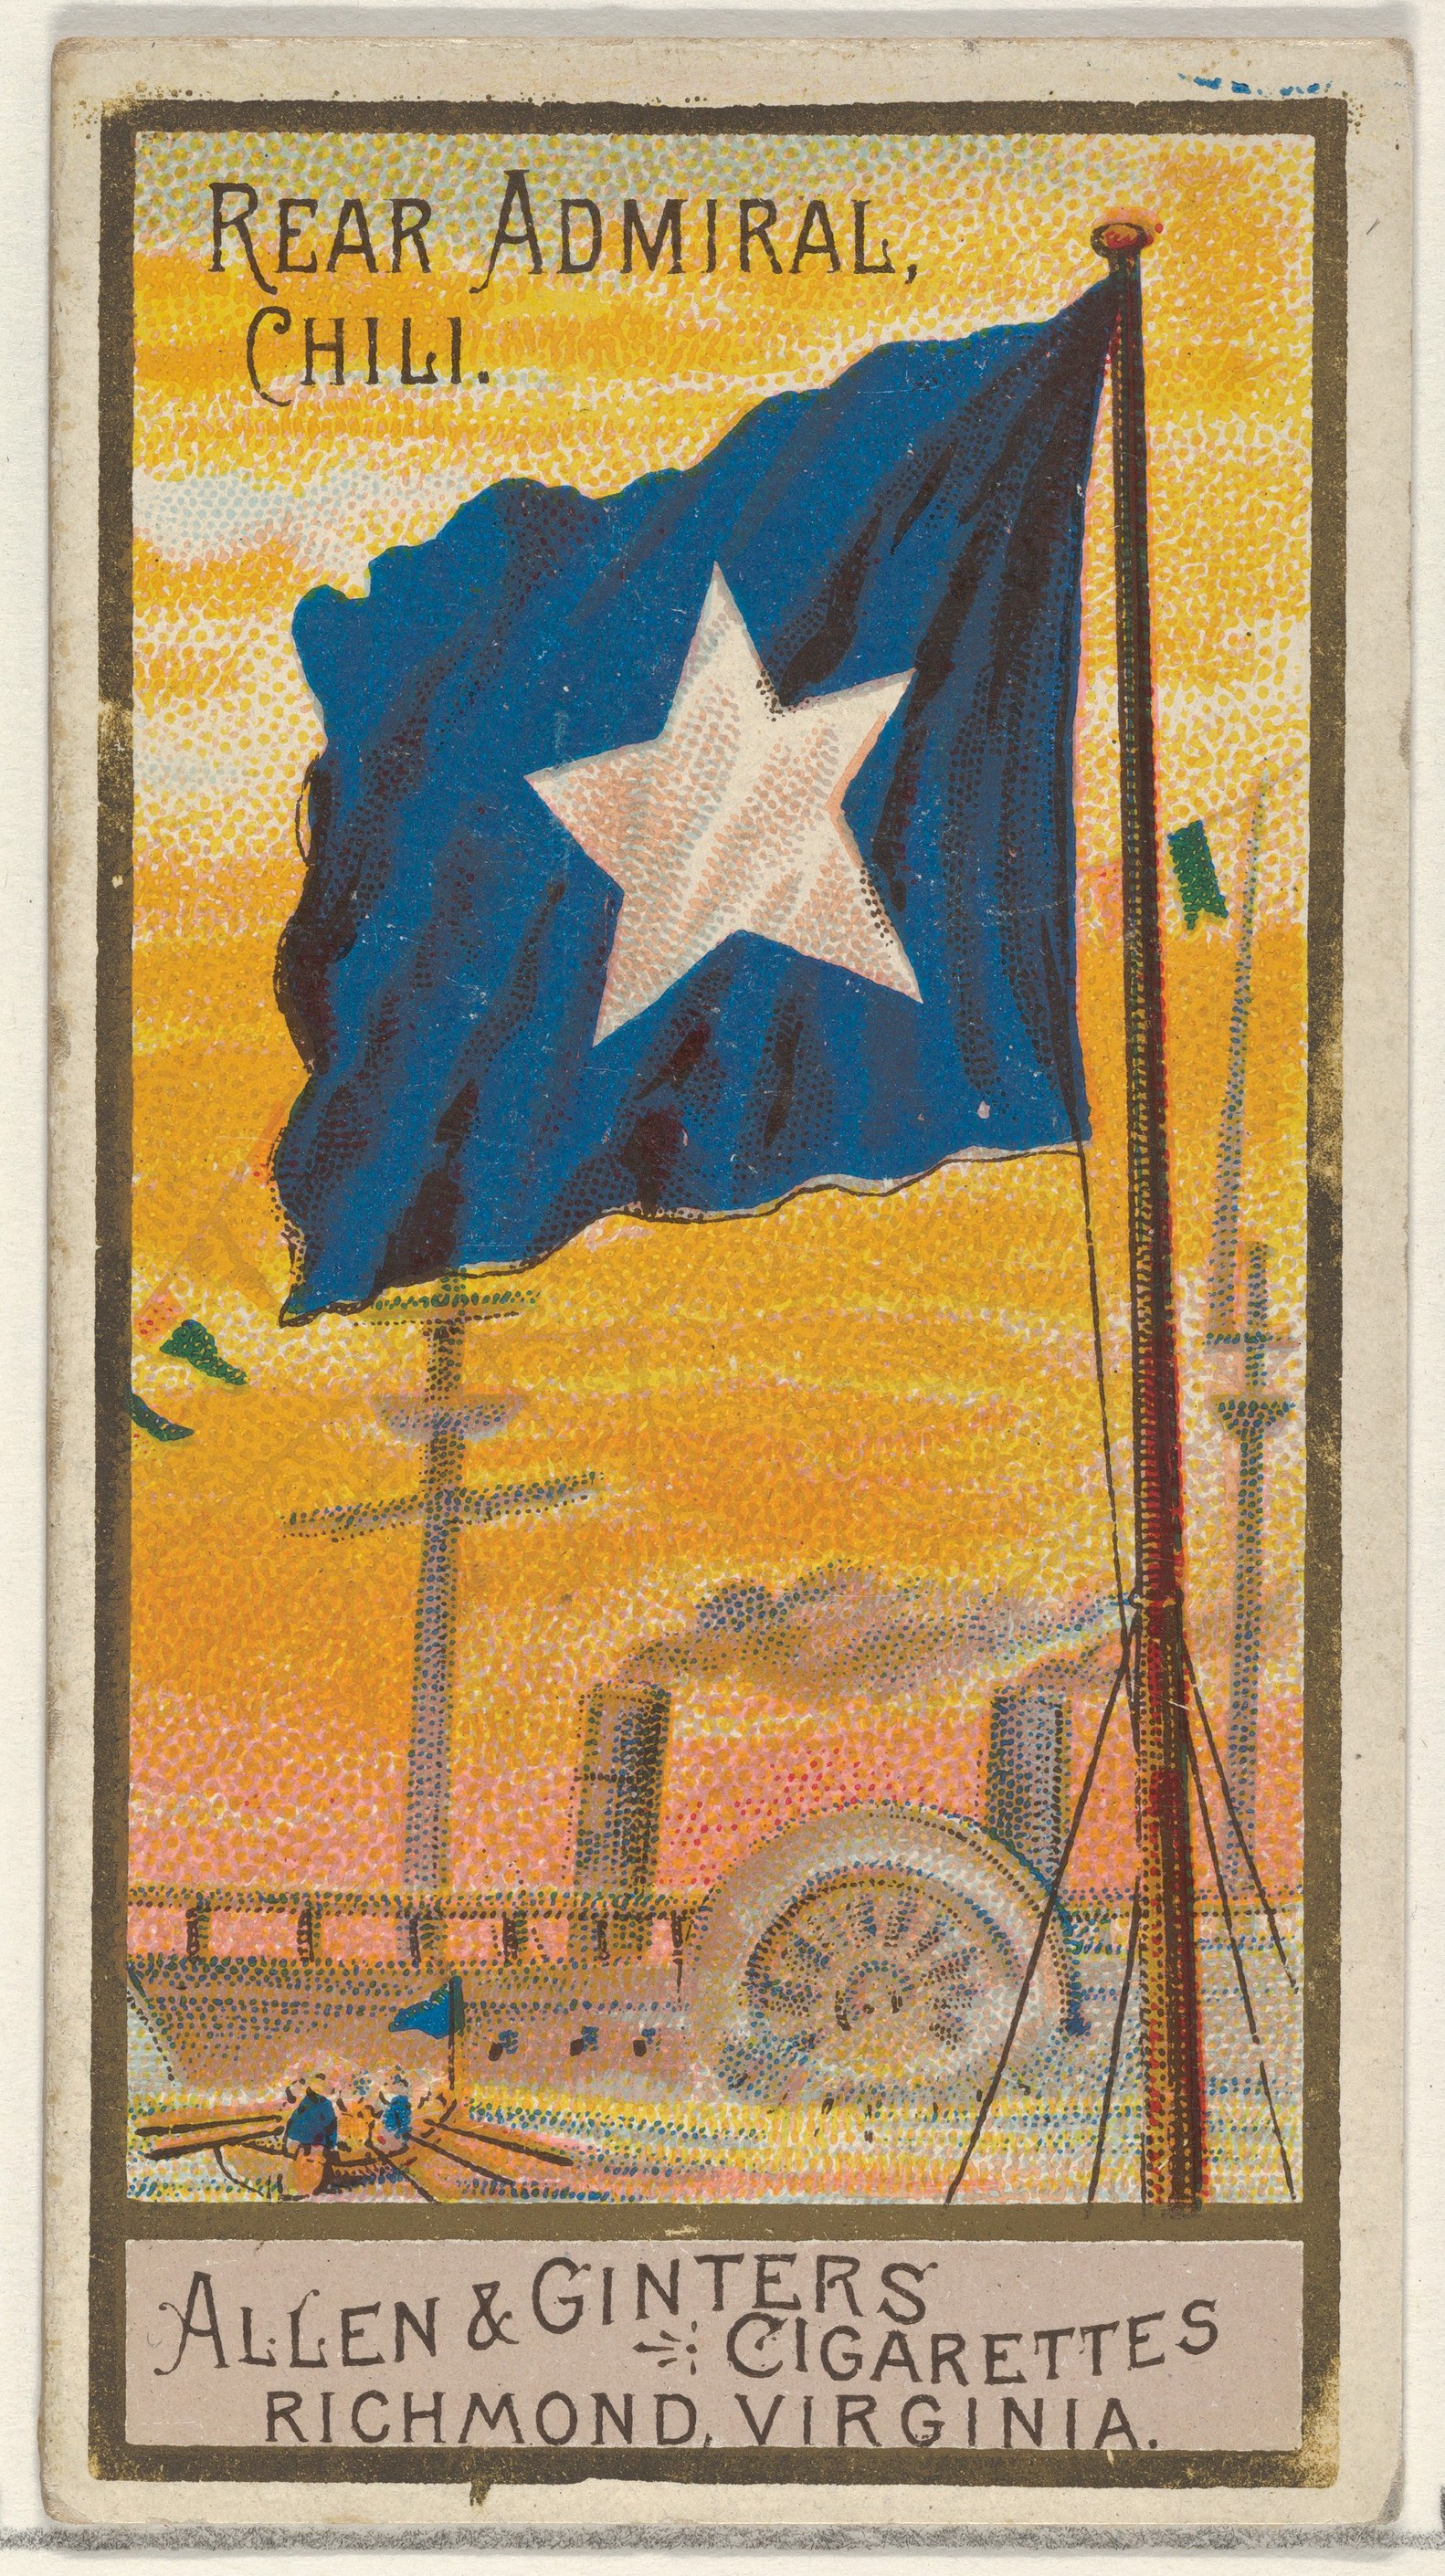 Allen & Ginter Rear Admiral, Chili, from the Naval Flags series (N17